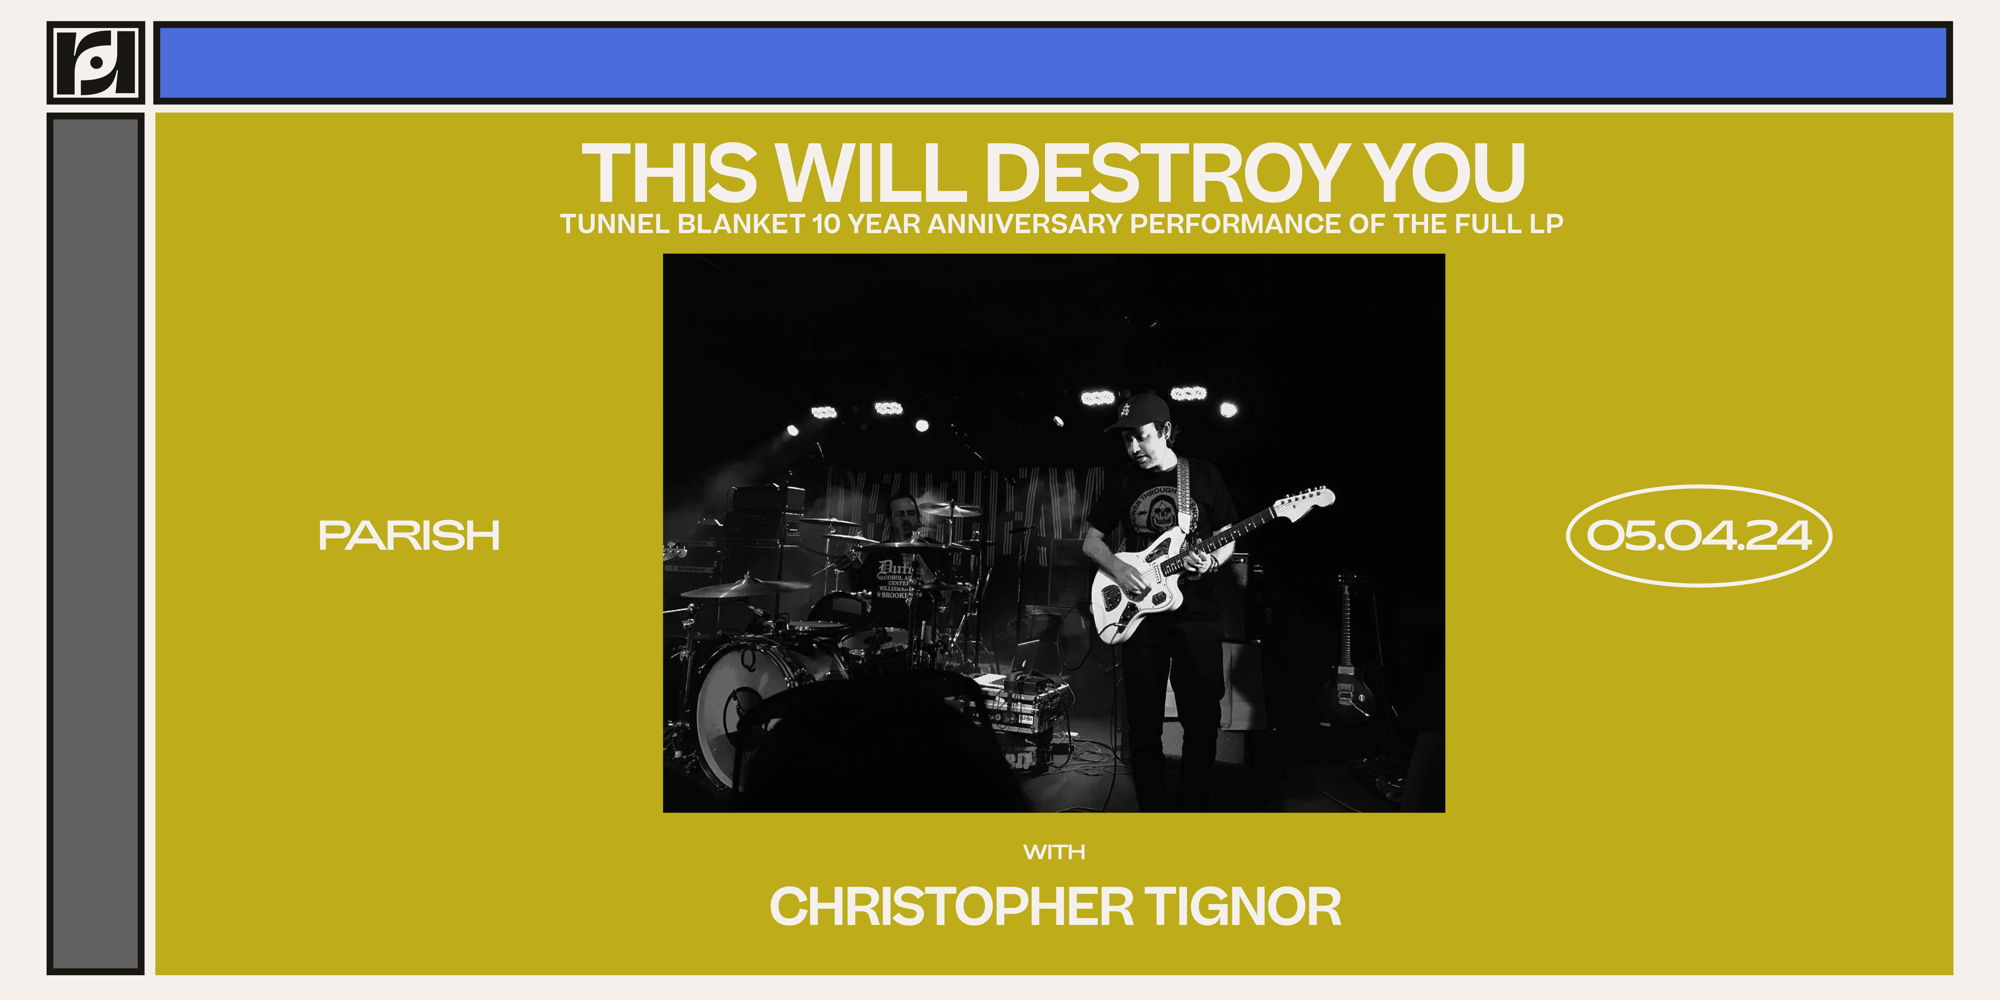 This Will Destroy You presents: Tunnel Blanket  10 Year Anniversary Performance of the Full LP w/ Christopher Tignor promotional image